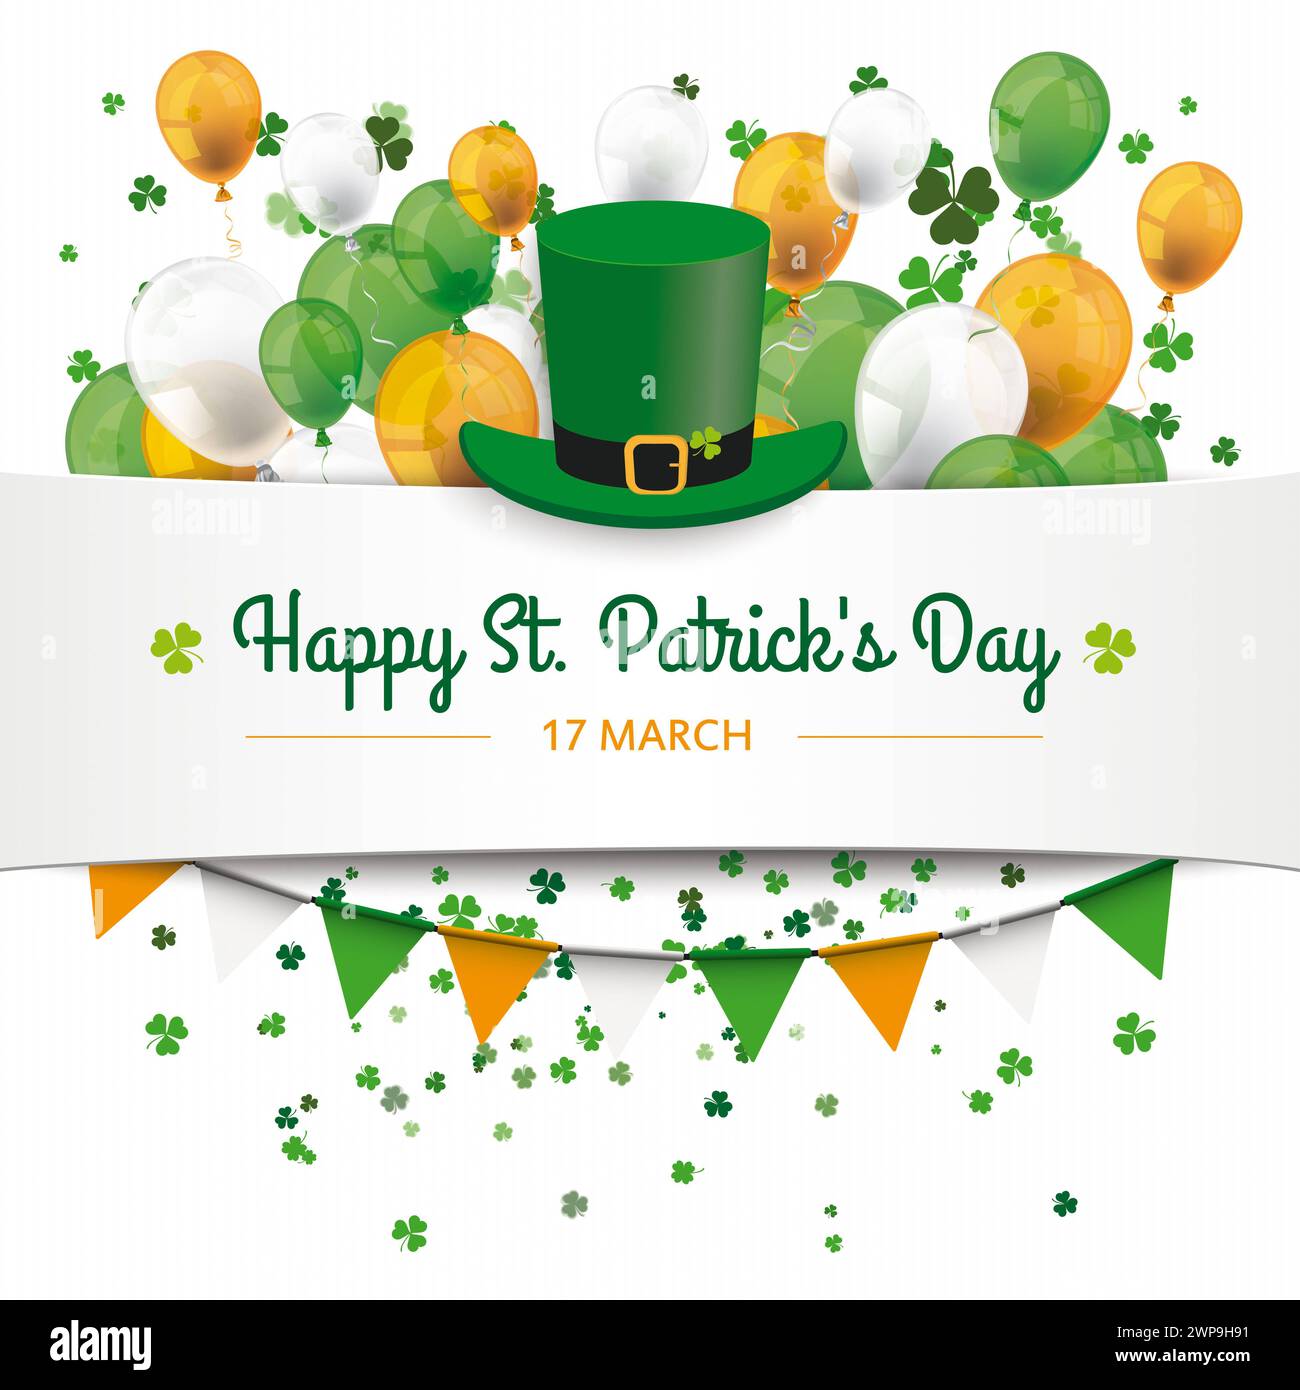 St Patricks Day Shamrock White Cover Balloons Vintage cover with for St. Patrick s Day. Stock Photo